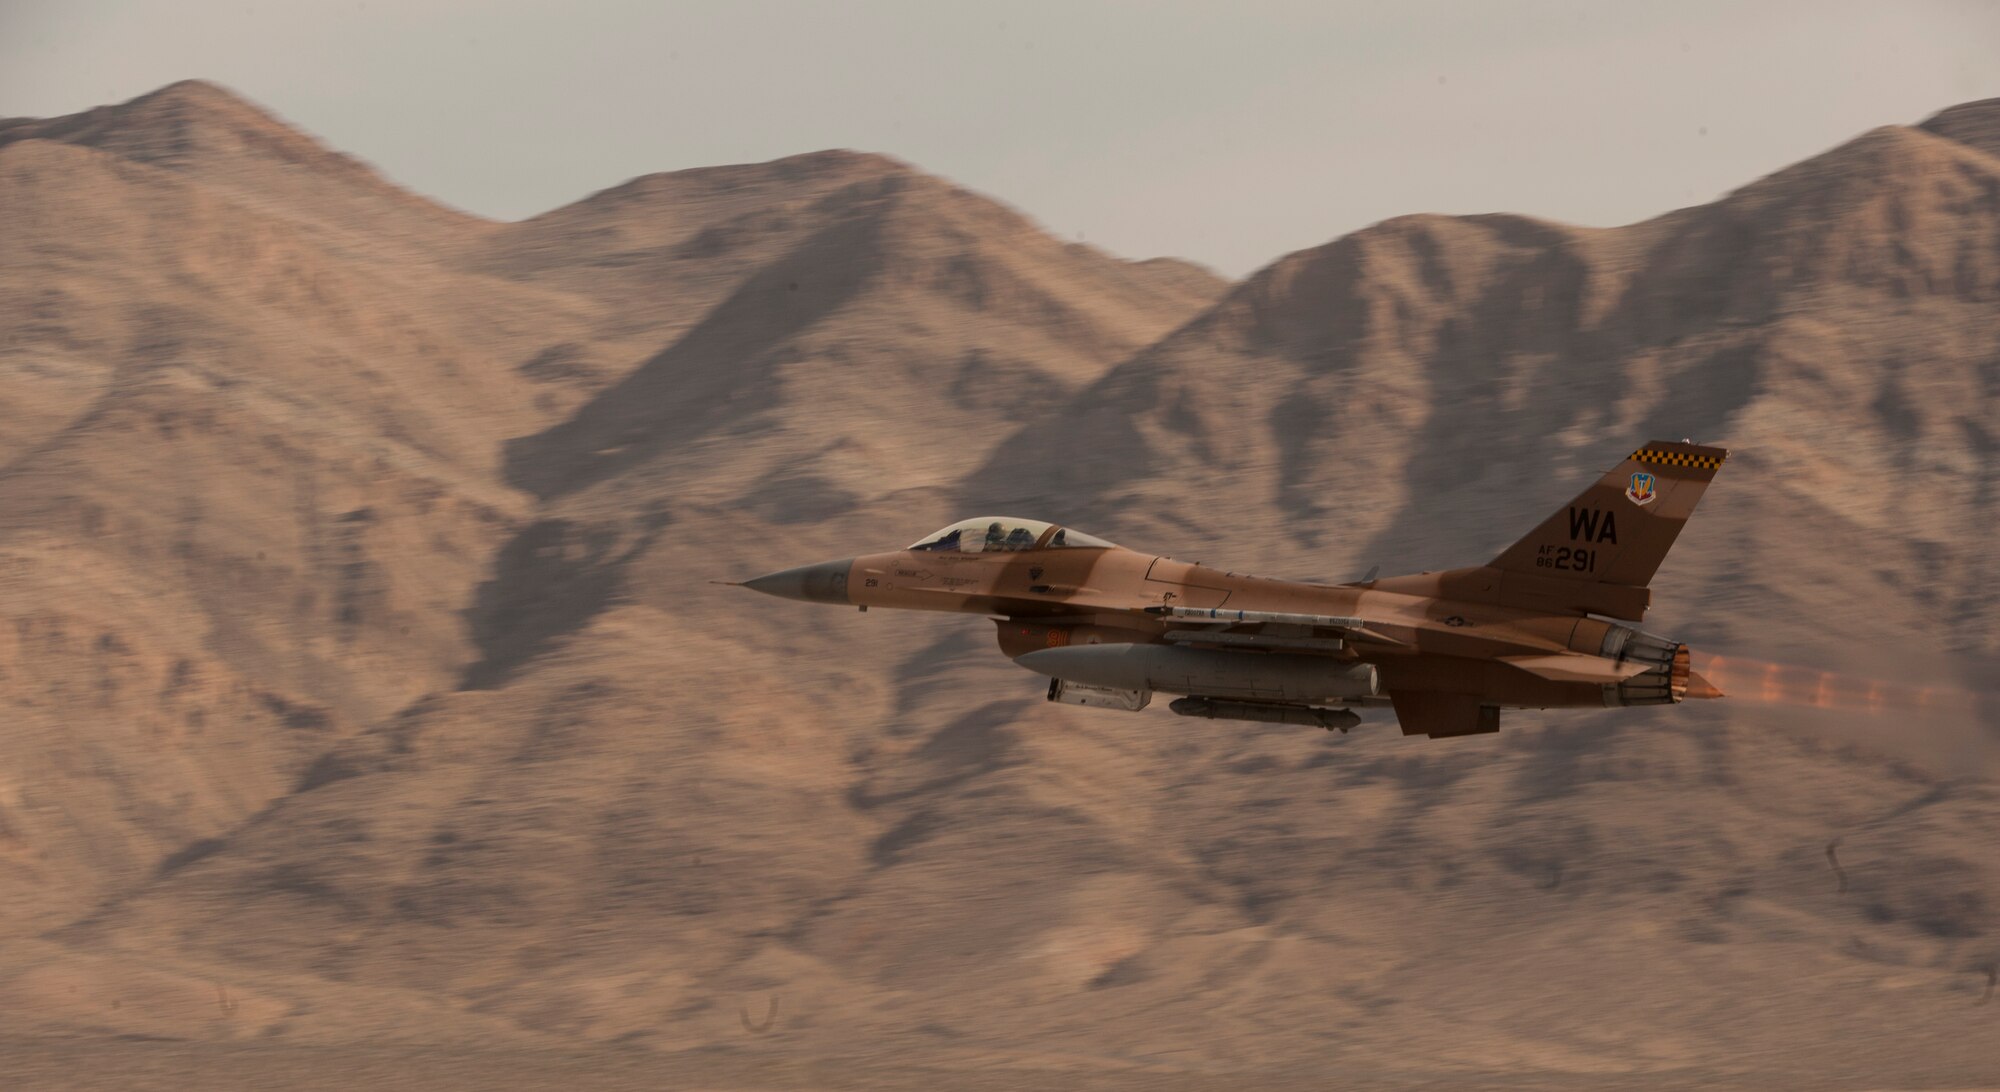 An F-16 Fighting Falcon assigned to the 64th Aggressor Squadron, takes to the sky as part of a Red Flag 15-1 training sortie from Nellis Air Force Base, Nev., Feb. 4, 2015. The 64th AGRS operates F-16s and F-15s in their role as an intelligent, adaptable adversary in support of various air combat exercises. (U.S. Air Force photo by Airman 1st Class Joshua Kleinholz)